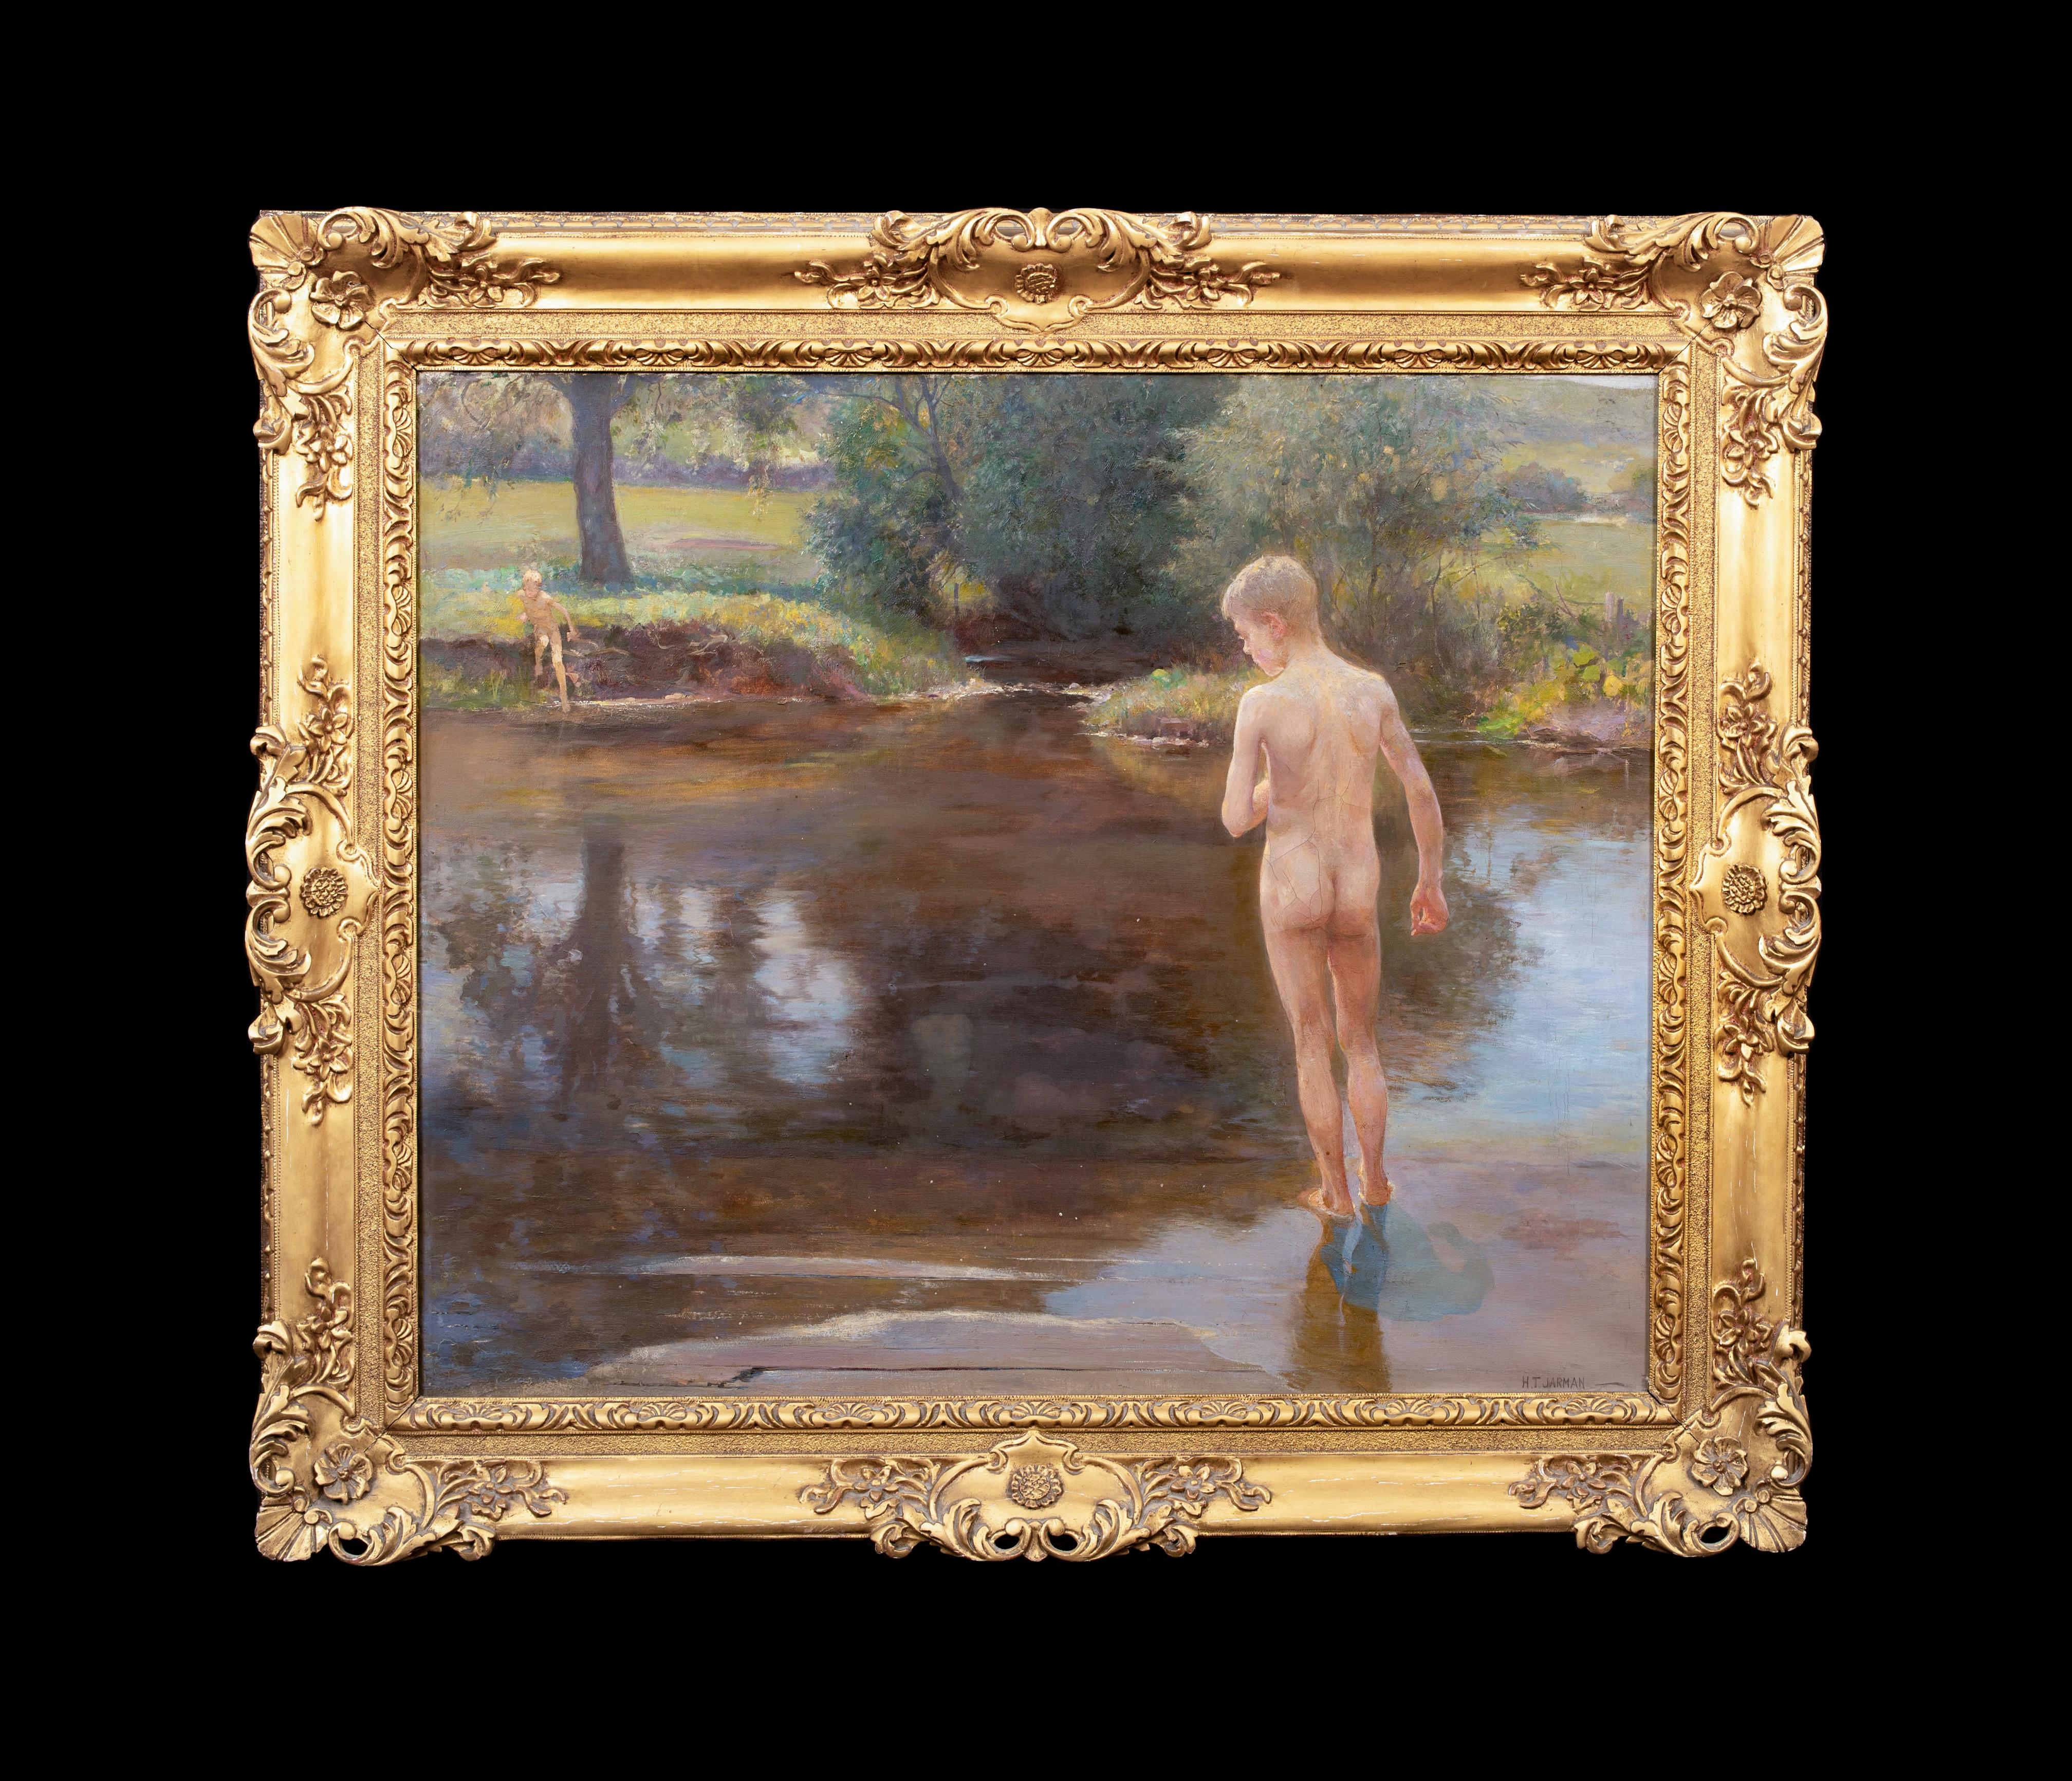 Nude Boys At A Lake, circa 1920  by Henry Thomas Jarman (1871-1956) - Painting by Unknown